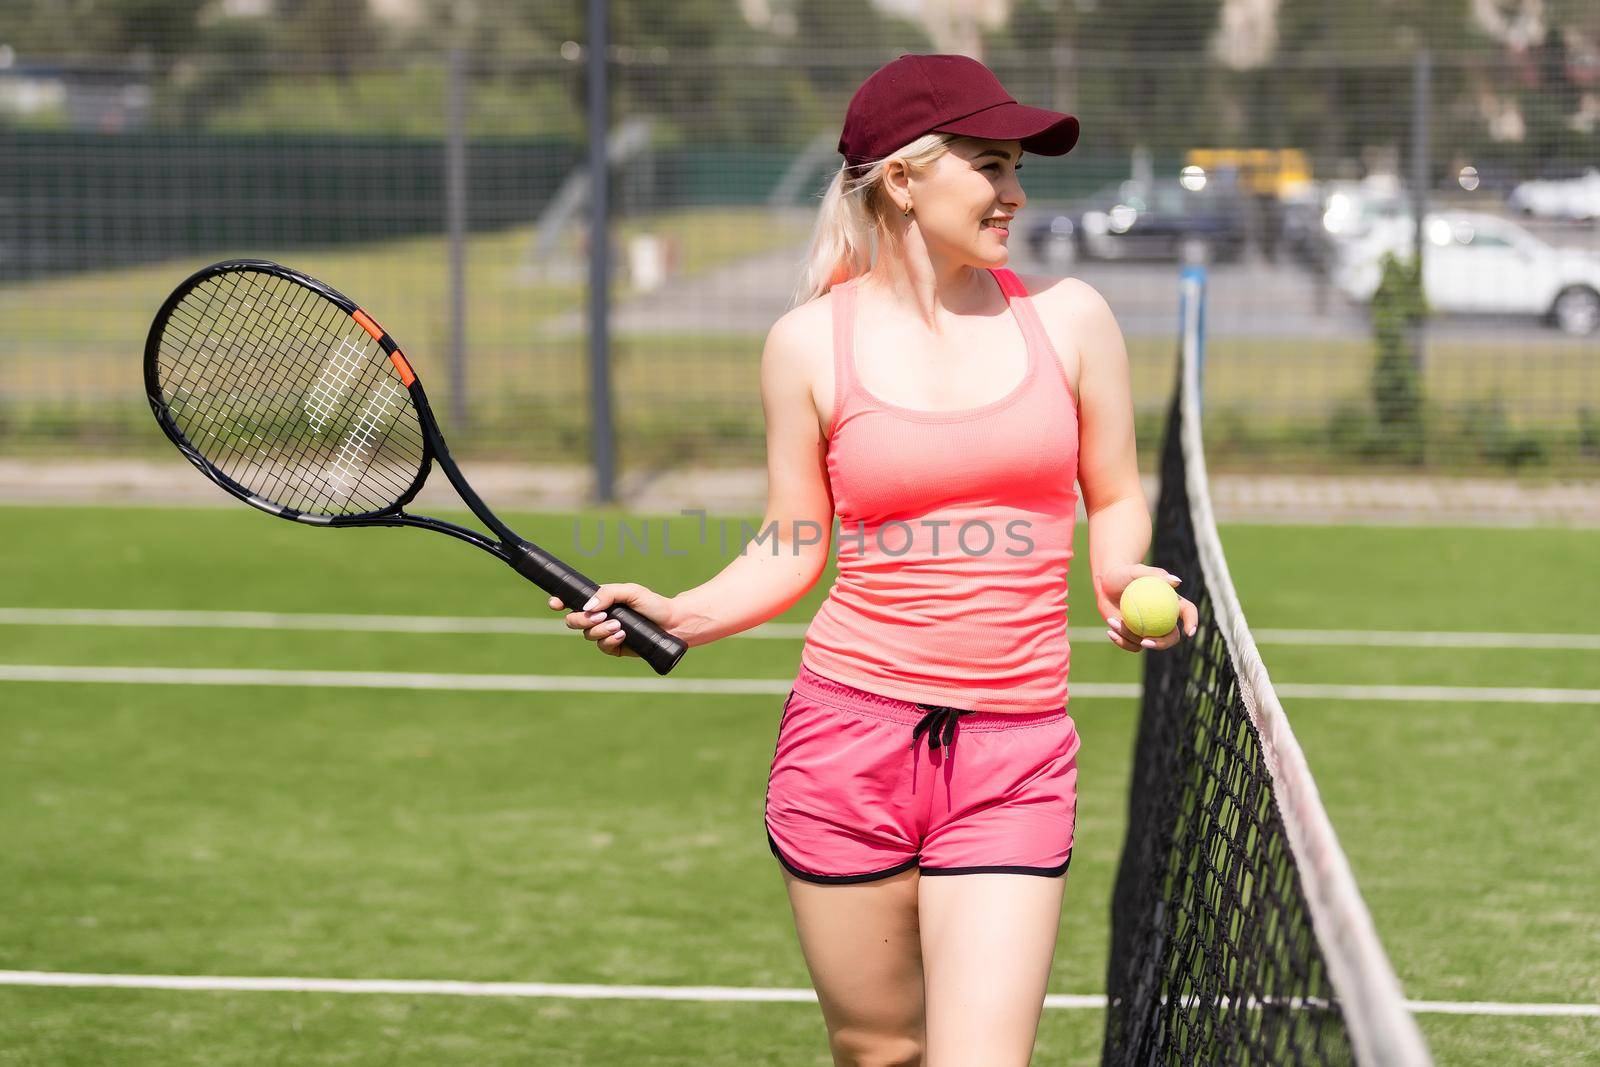 Woman playing tennis holding a racket and smiling by Andelov13